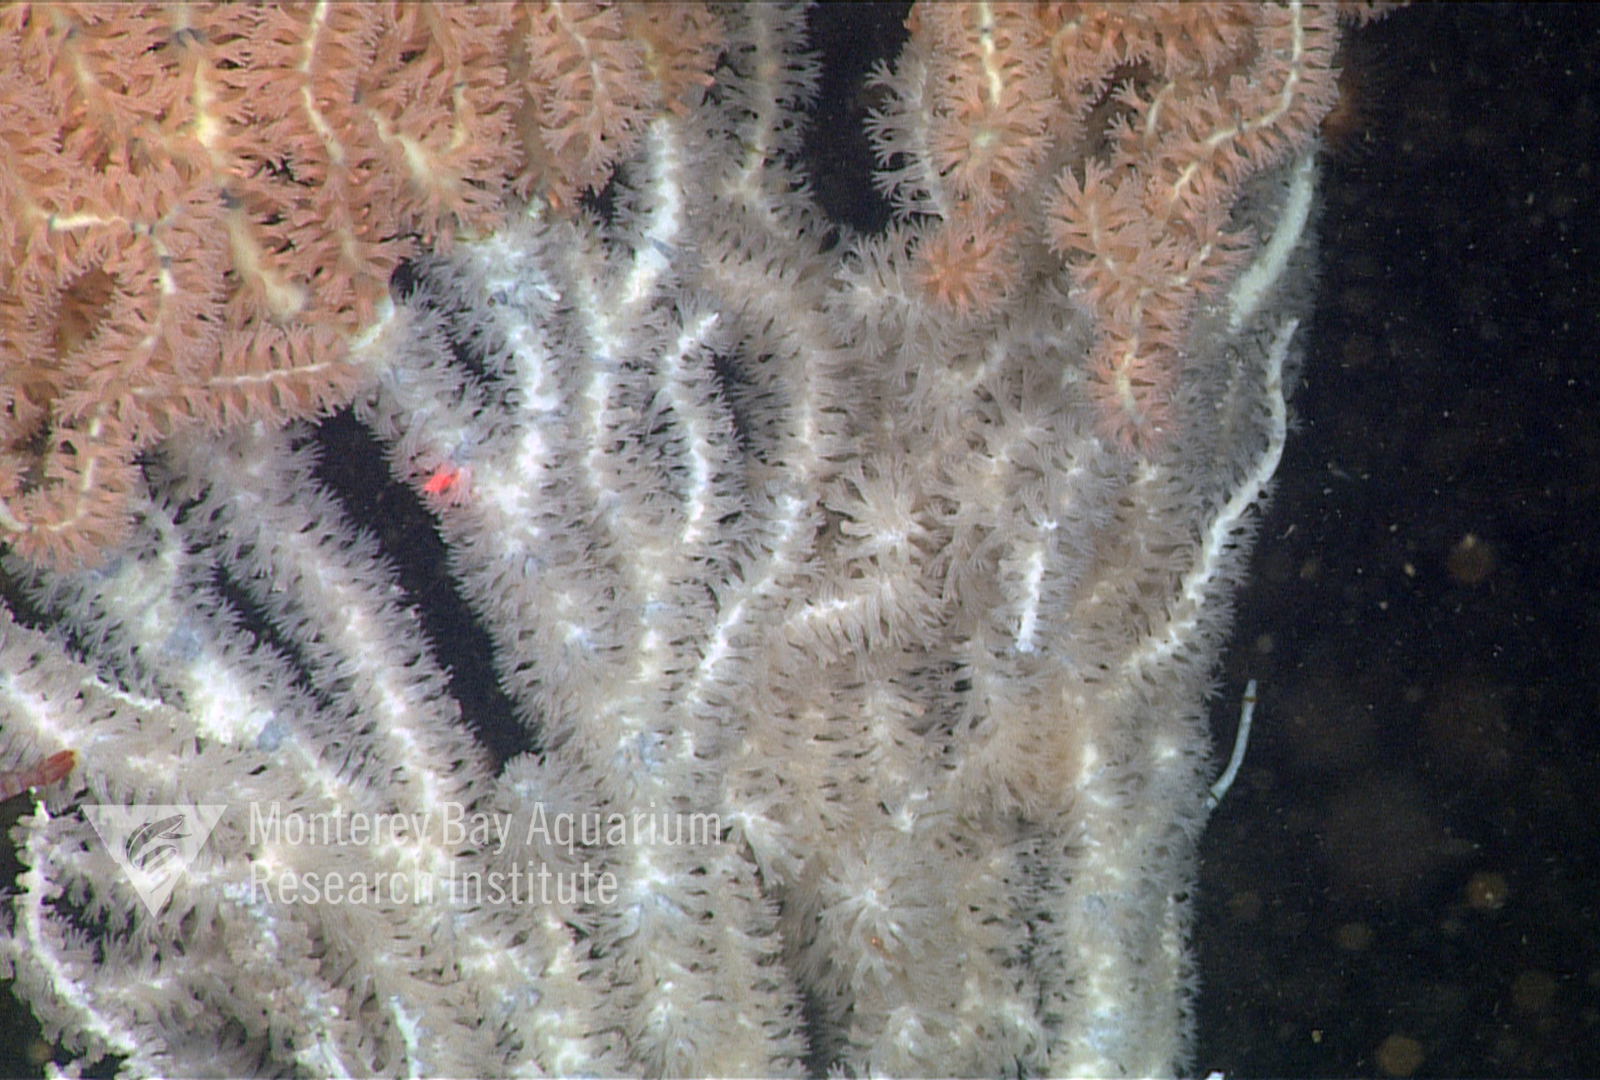 Close-up of an animal with white polyps.